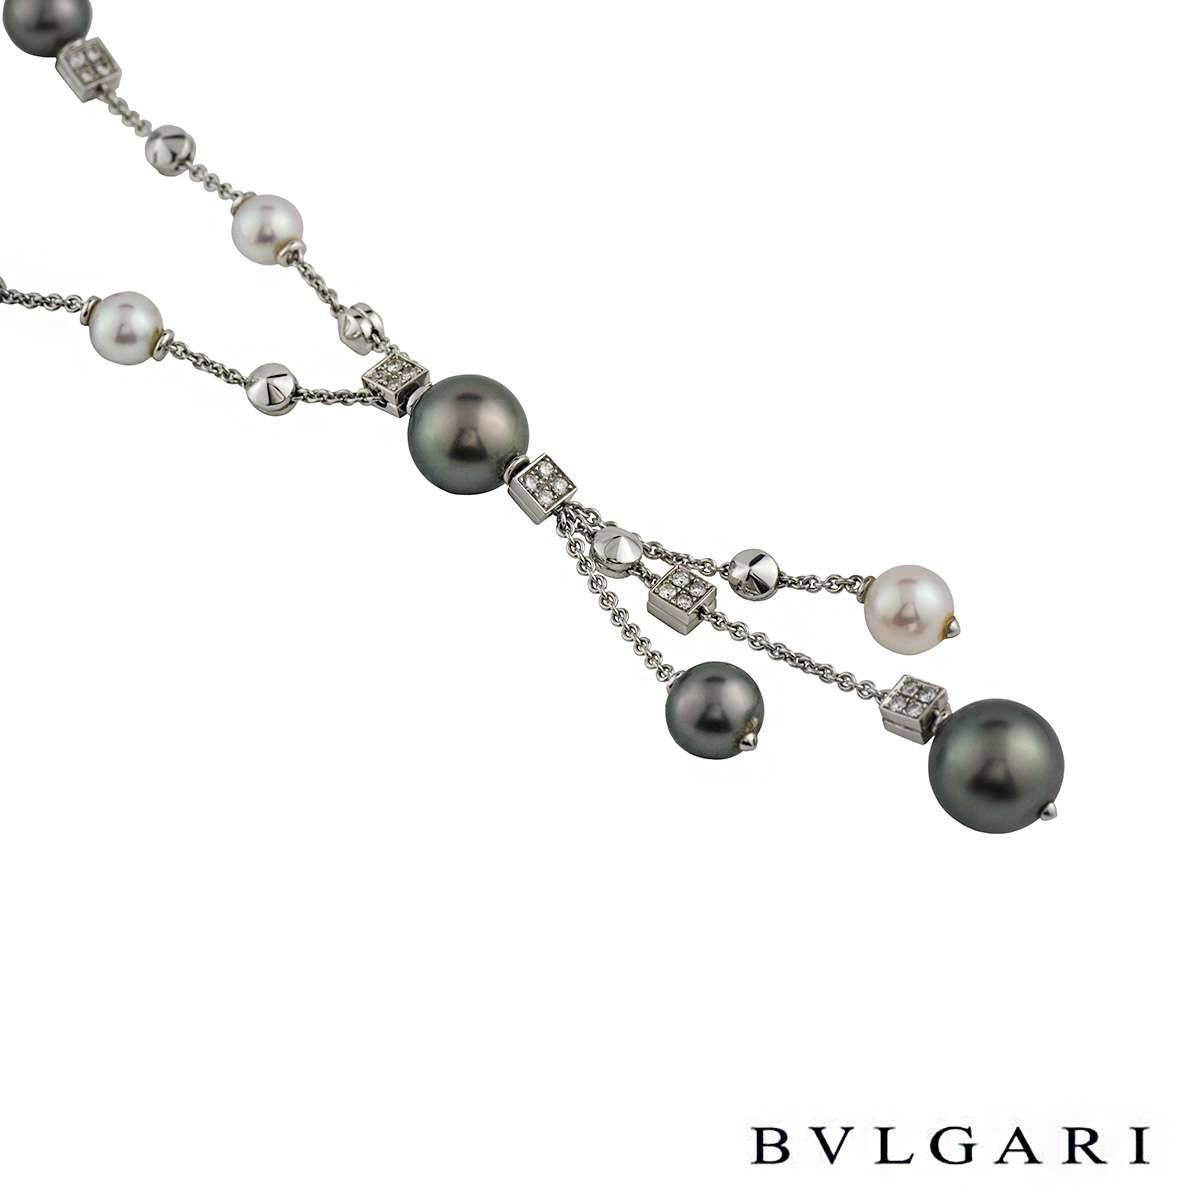 A beautiful pearl and diamond necklace from the Lucea collection by Bvlgari. The necklace features both Tahitian and white/pink pearls in a mixture of sizes, spread along the necklace and the vertical drop. The necklace also features 6 square links